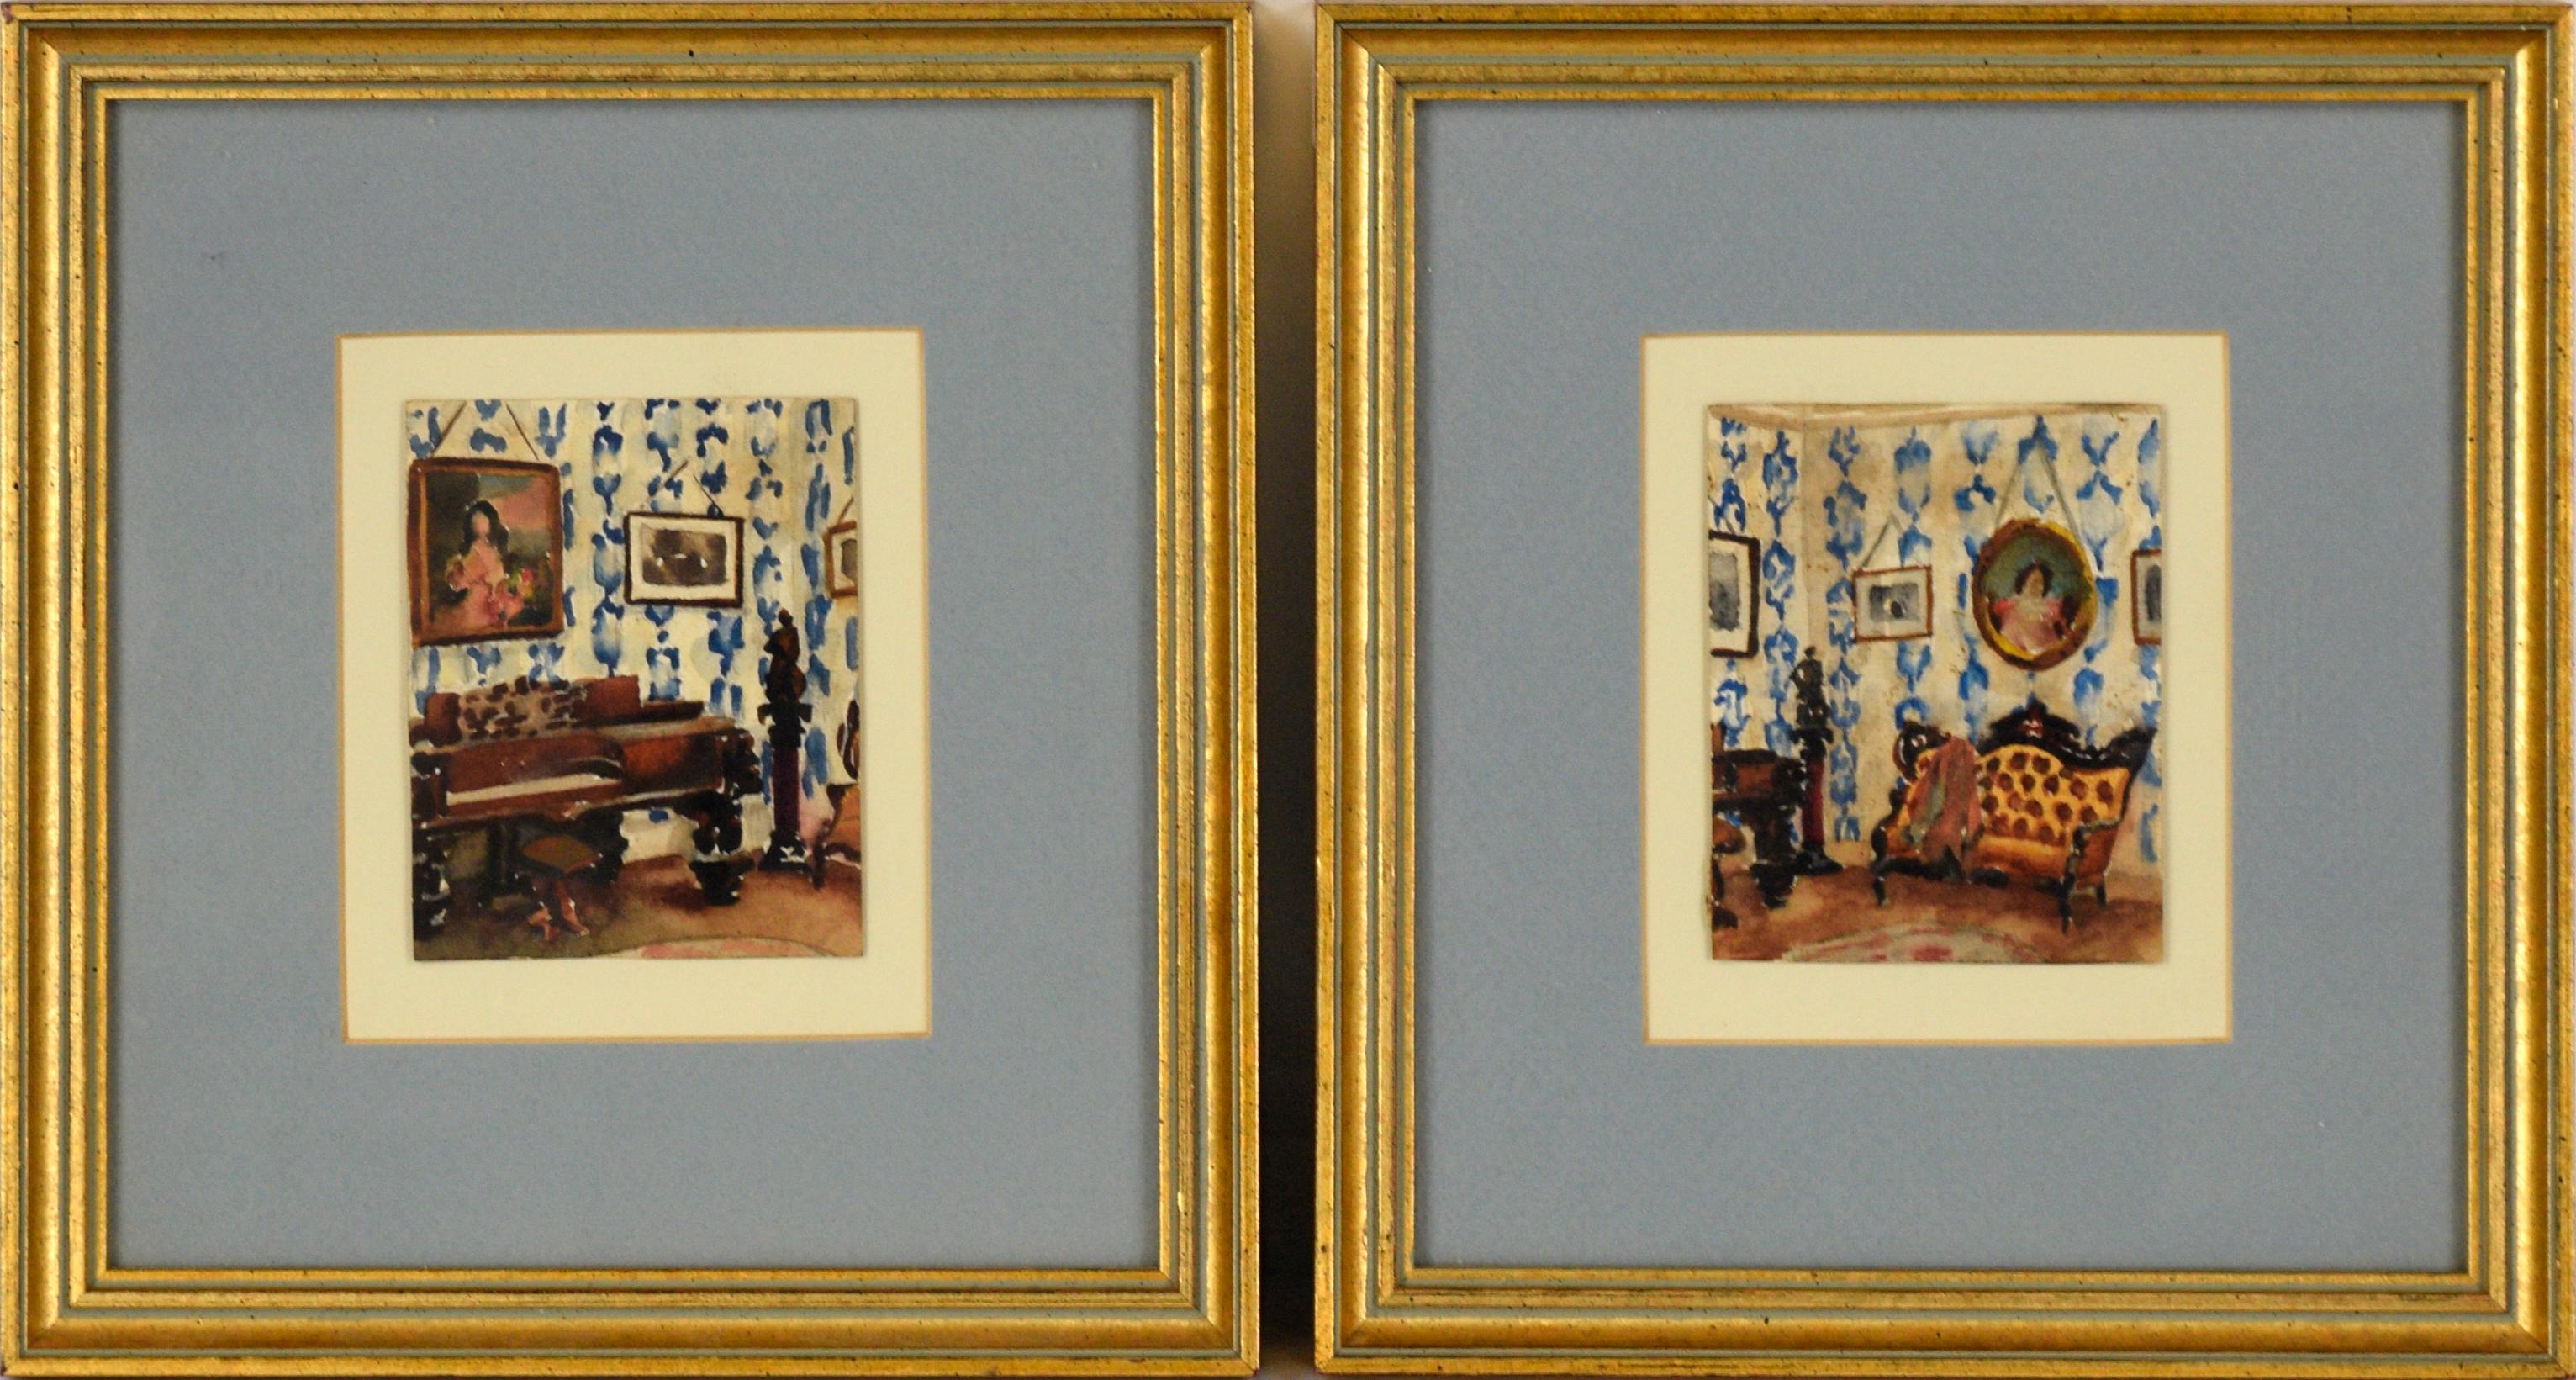 David Mode Payne Interior Art - Pair of Interior Scenes of a Victorian Home - Watercolor on Heavy Paper